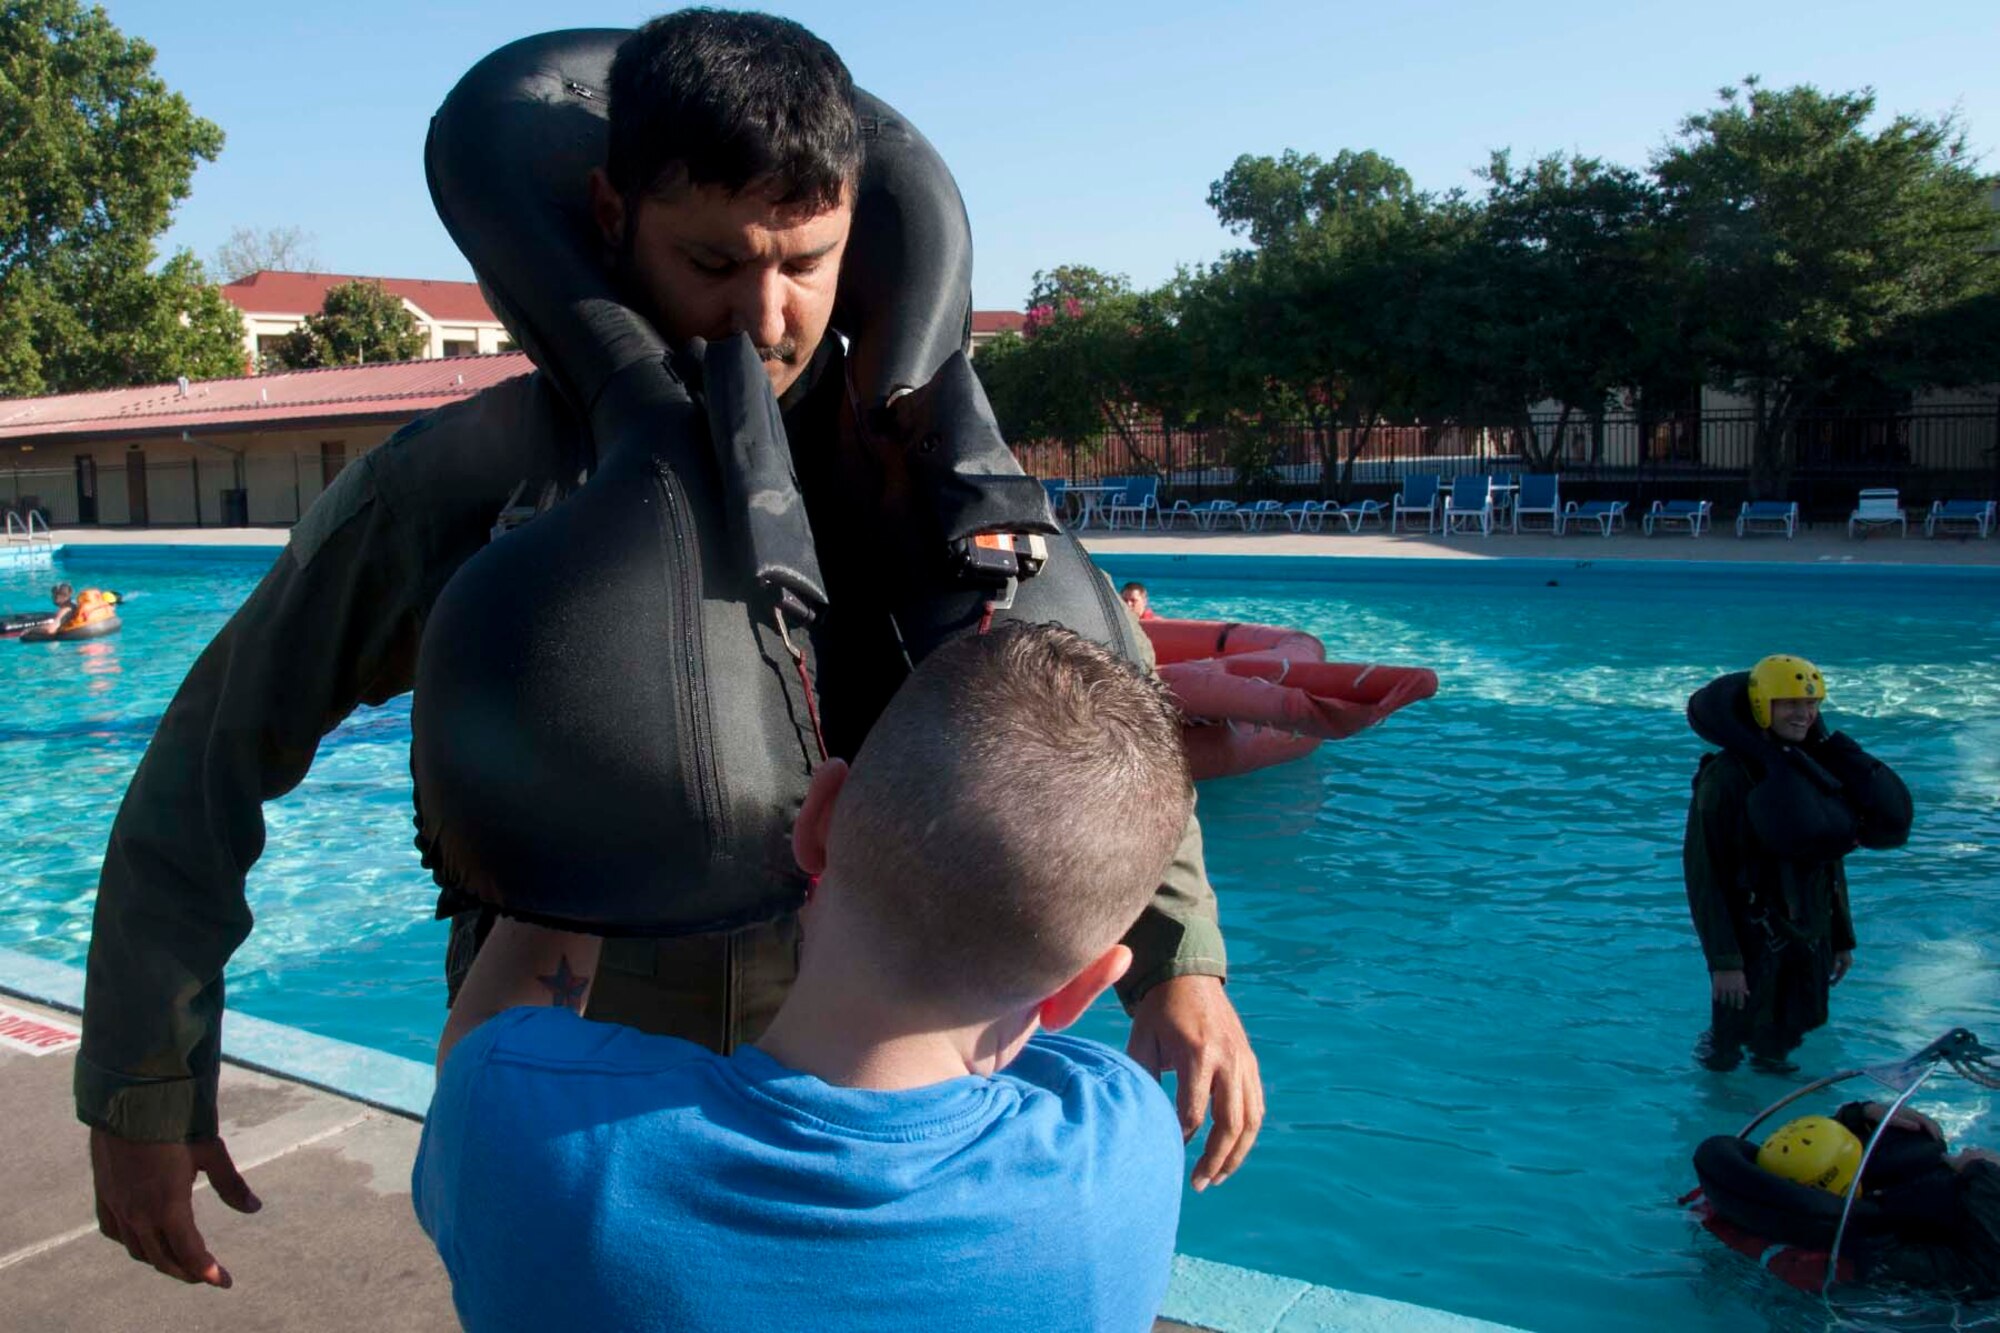 U.S. Air Force Lt. Col. Marc Kurup, 343rd Bomb Squadron Radar Navigator, watches as safety gear is strapped in place prior to taking part in water survival training at Barksdale Air Force Base, La., July 13, 2013.  The refresher course is required every three years for all air crew members.  Participants take part in four different stations and are coached on how to get away from a parachute and deploy and use various life-saving devices including rafts and helicopter lifts. ( U.S. Air Force photo by Tech. Sgt. Ted Daigle/Released)